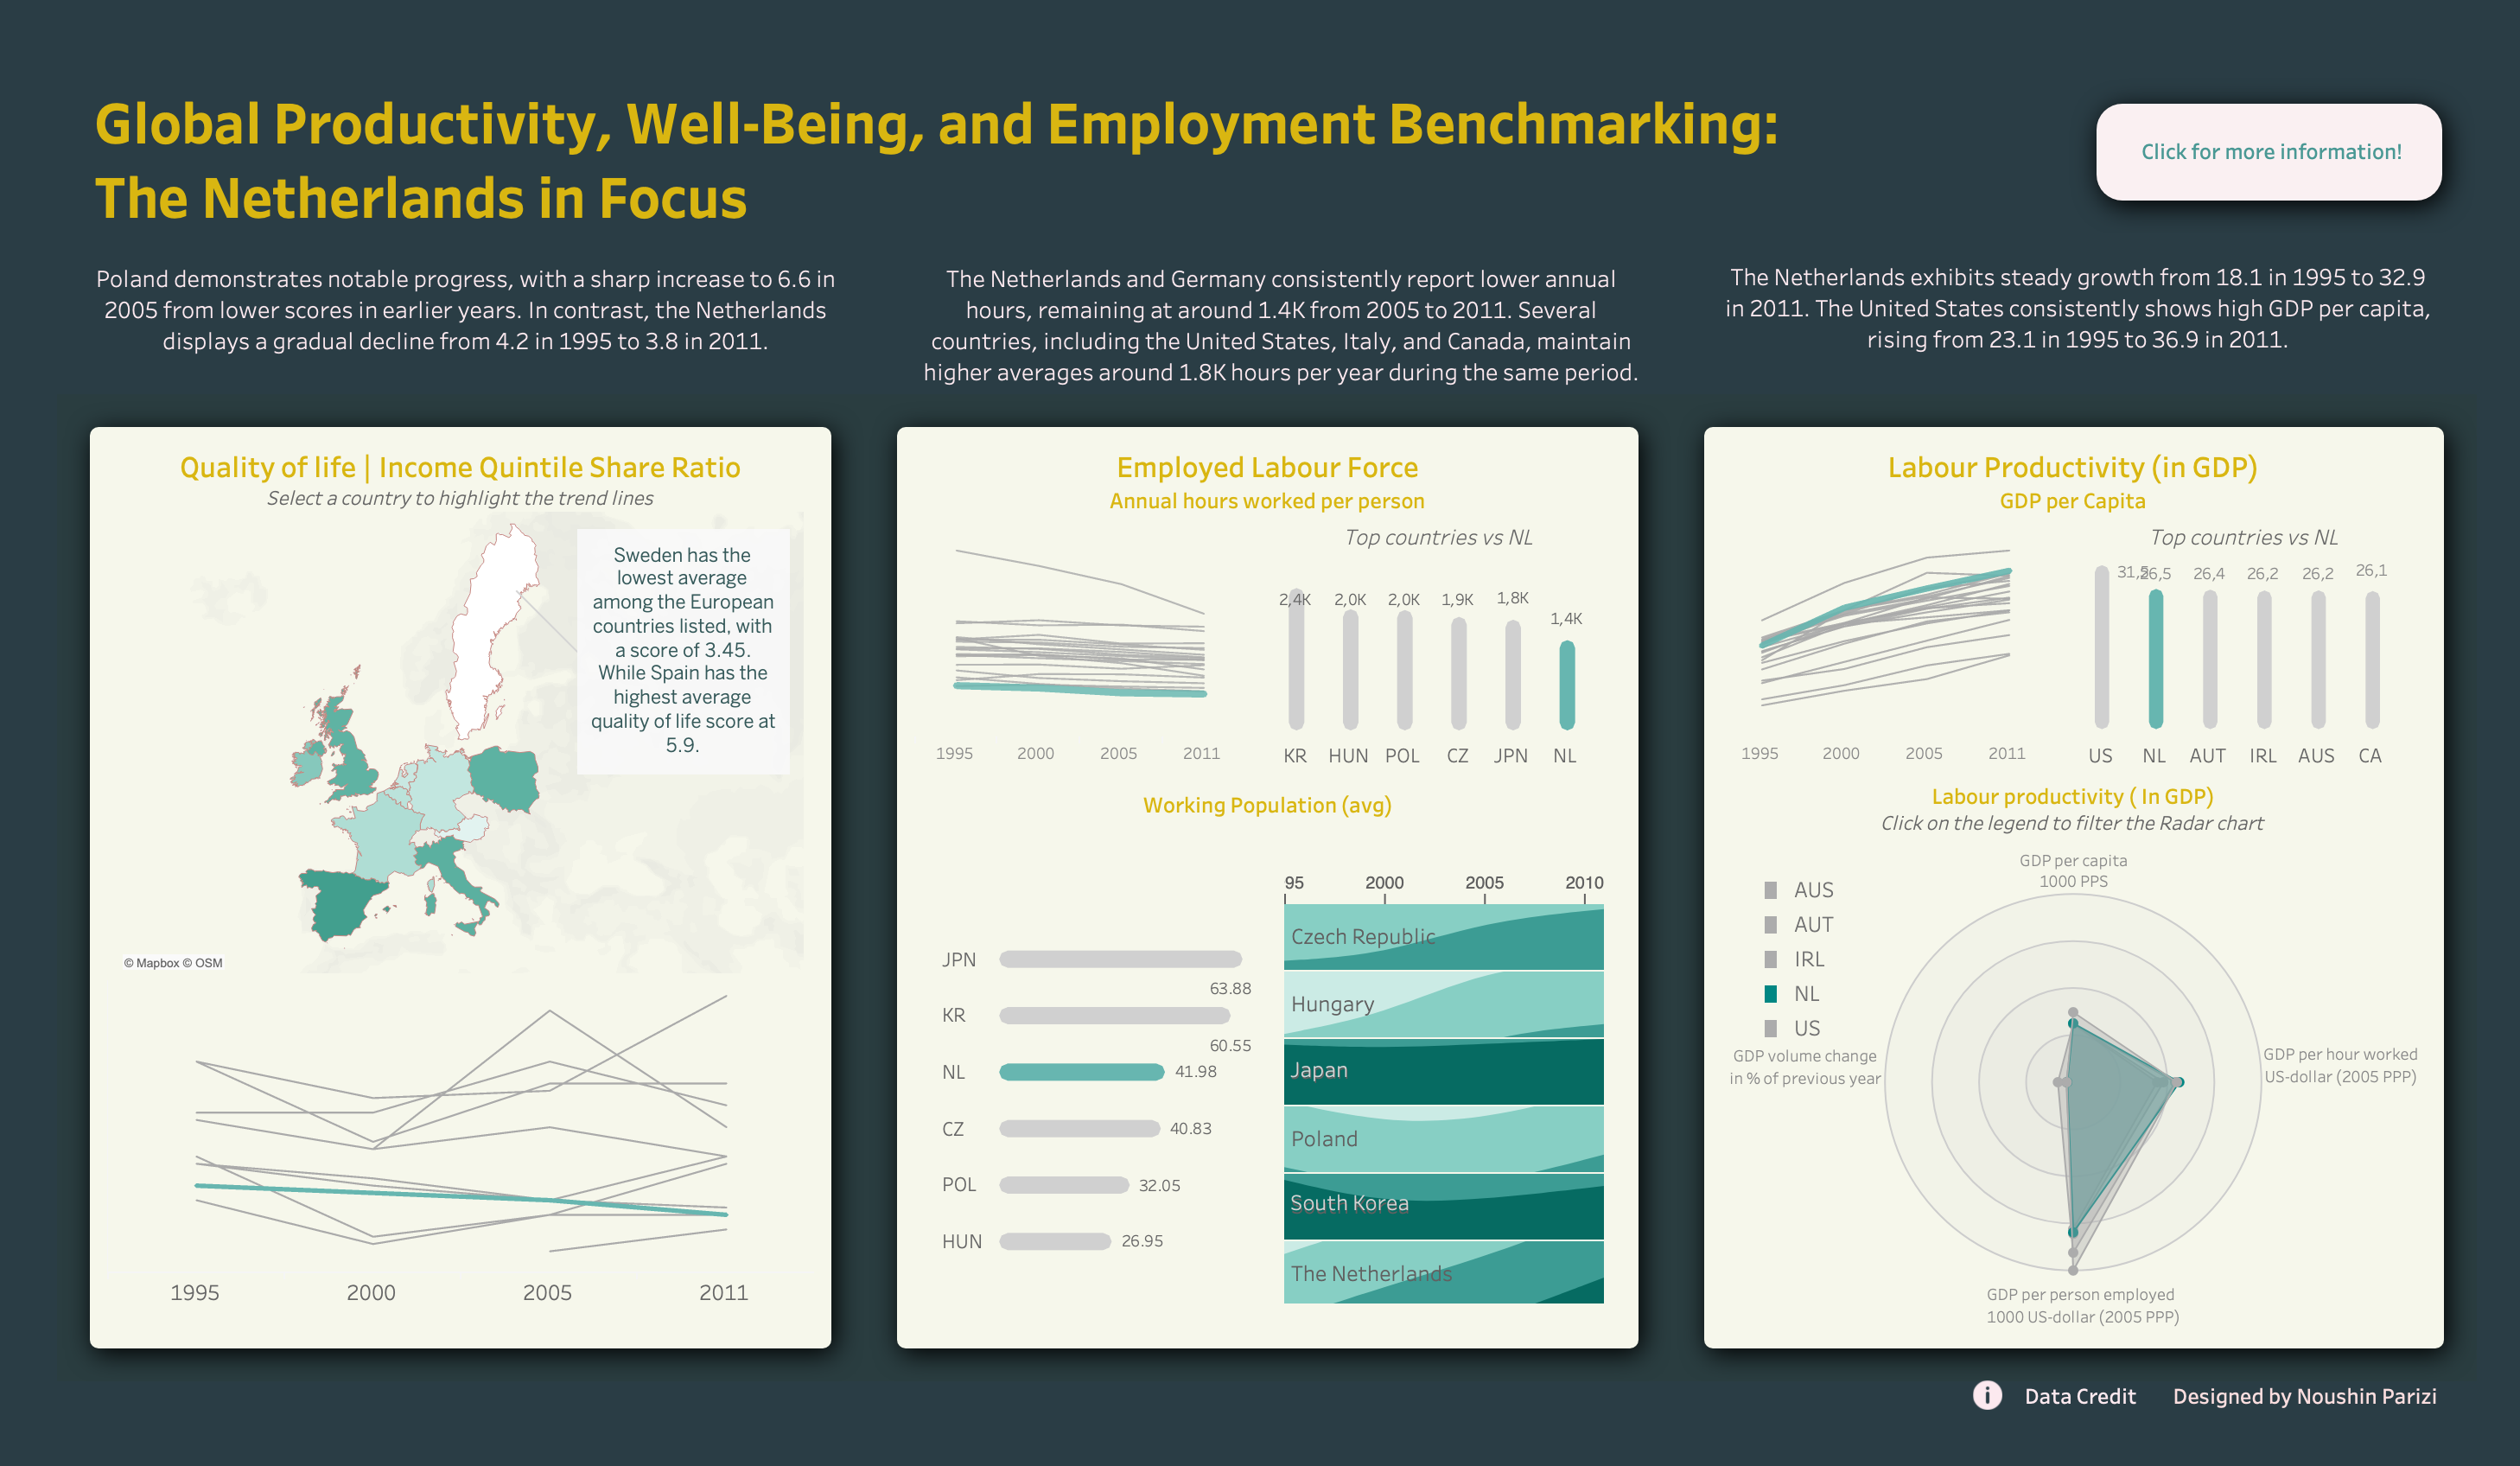 Global Productivity, Well-Being, and Employment Benchmarking